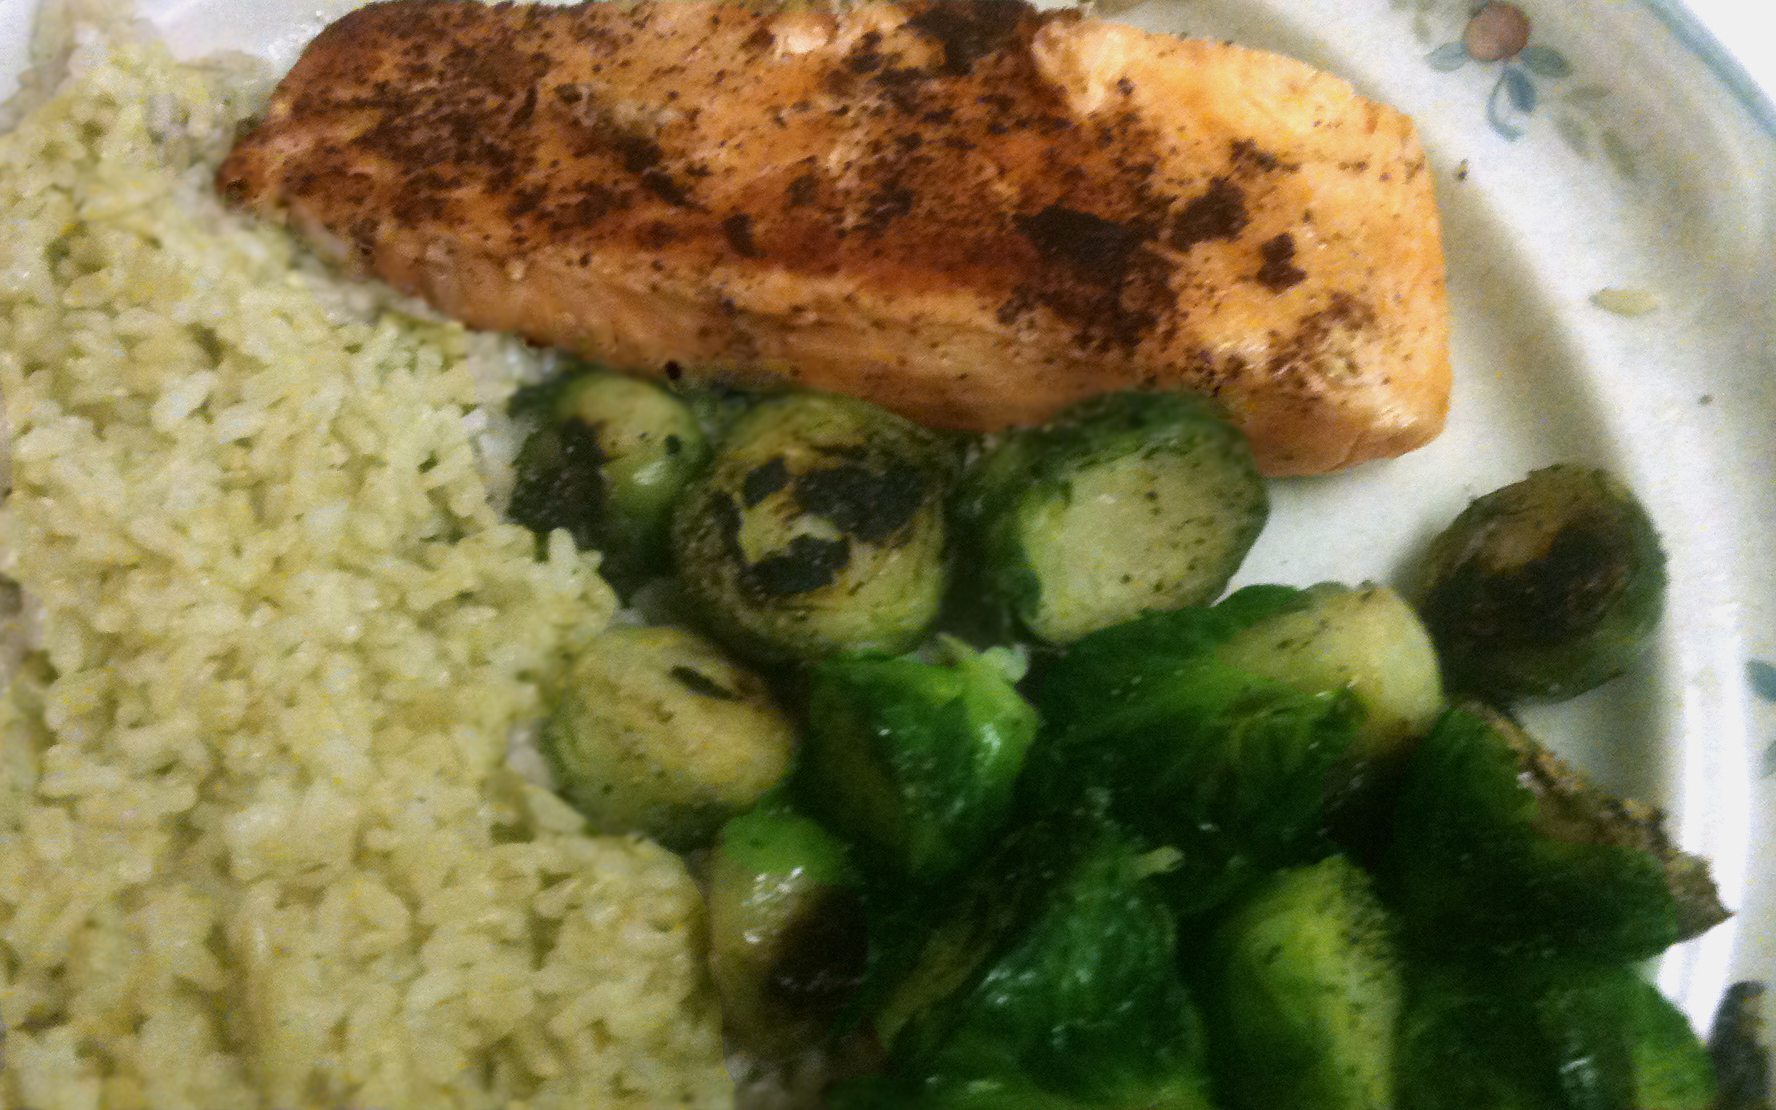 Salmon and Brussels sprouts